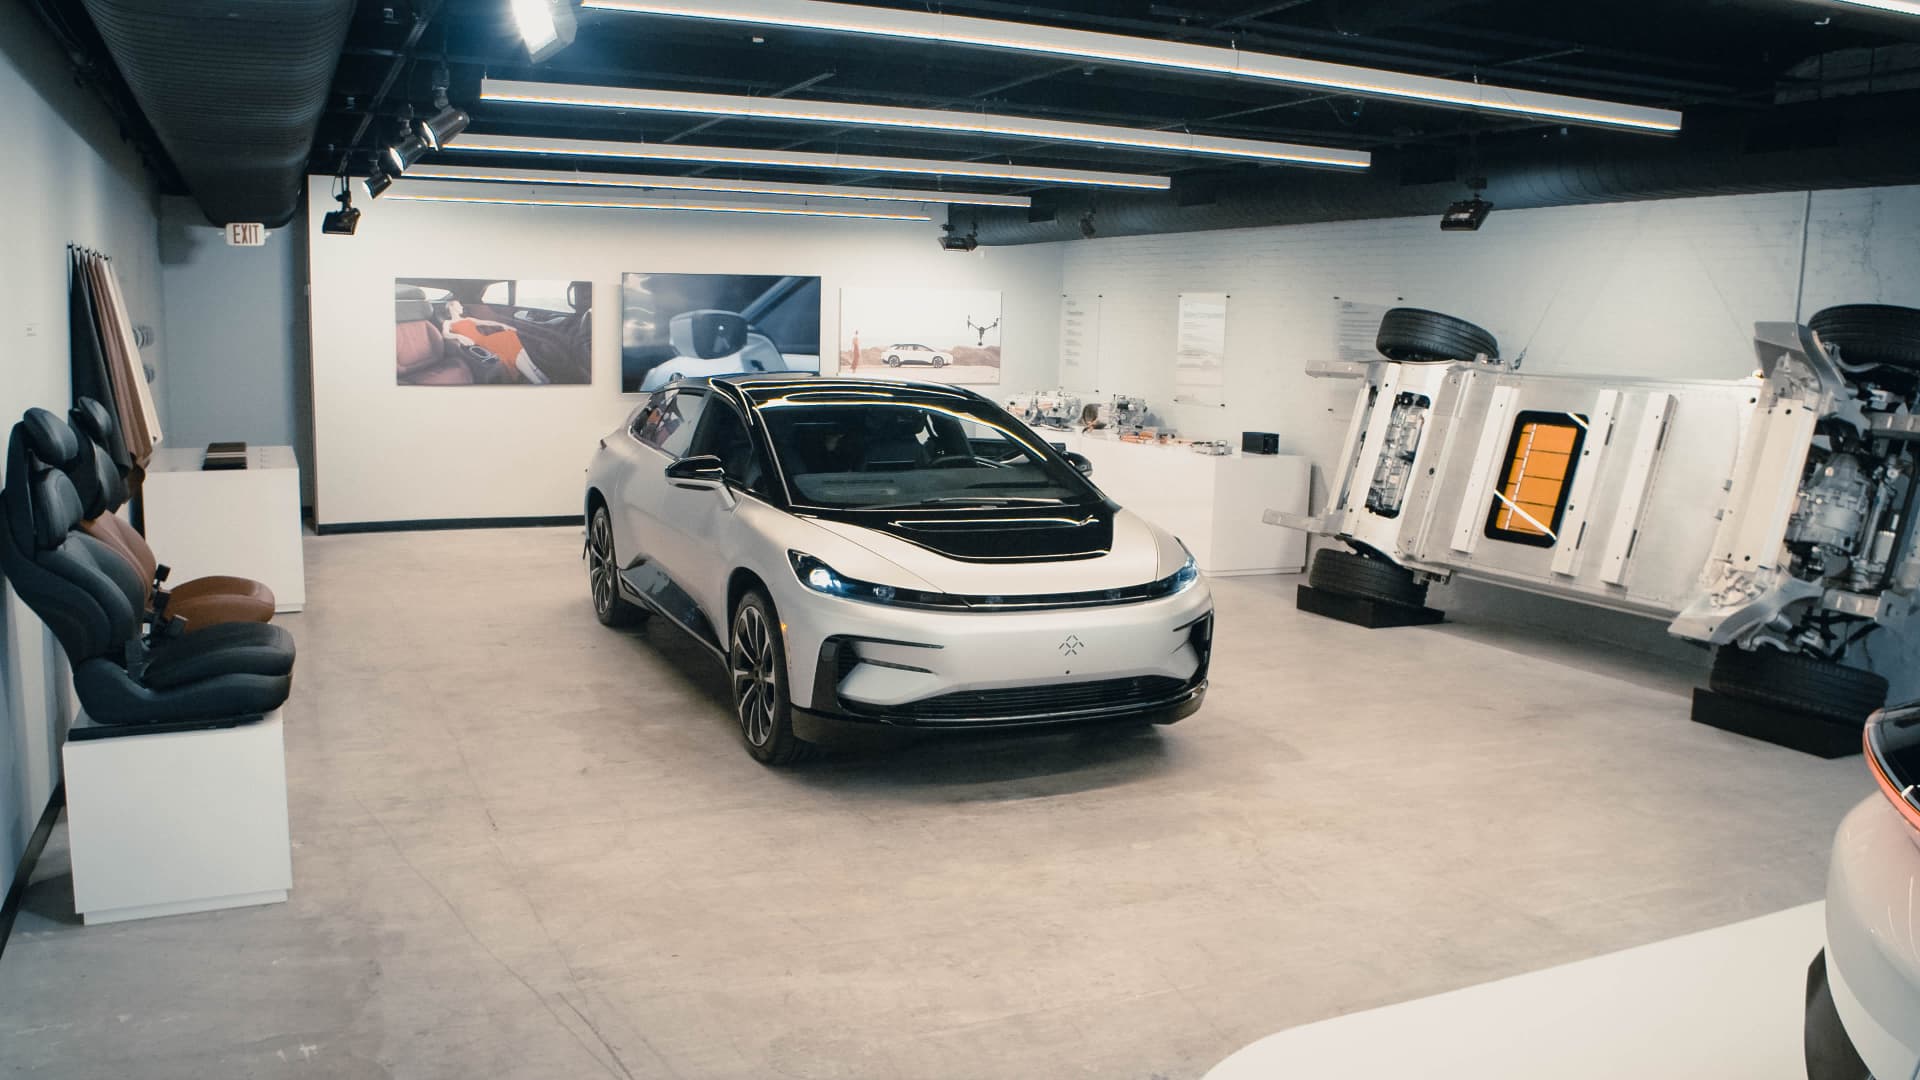 Faraday Future's newly created FF Futurist Experience studio, located at 5 East 59th Street in New York City.